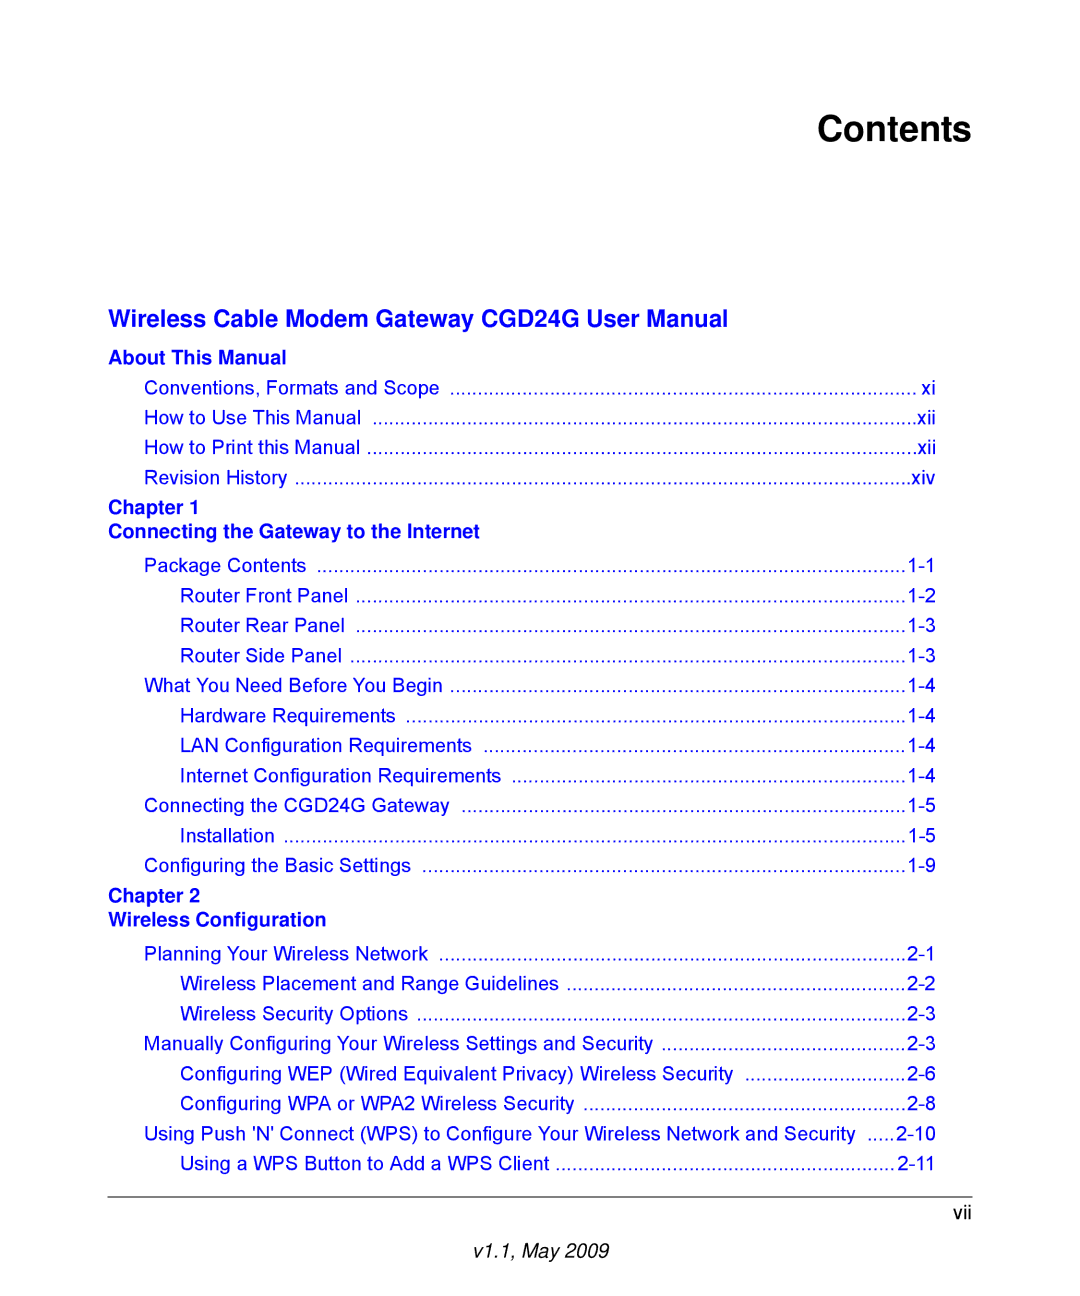 Gateway CGD24G user manual Contents 